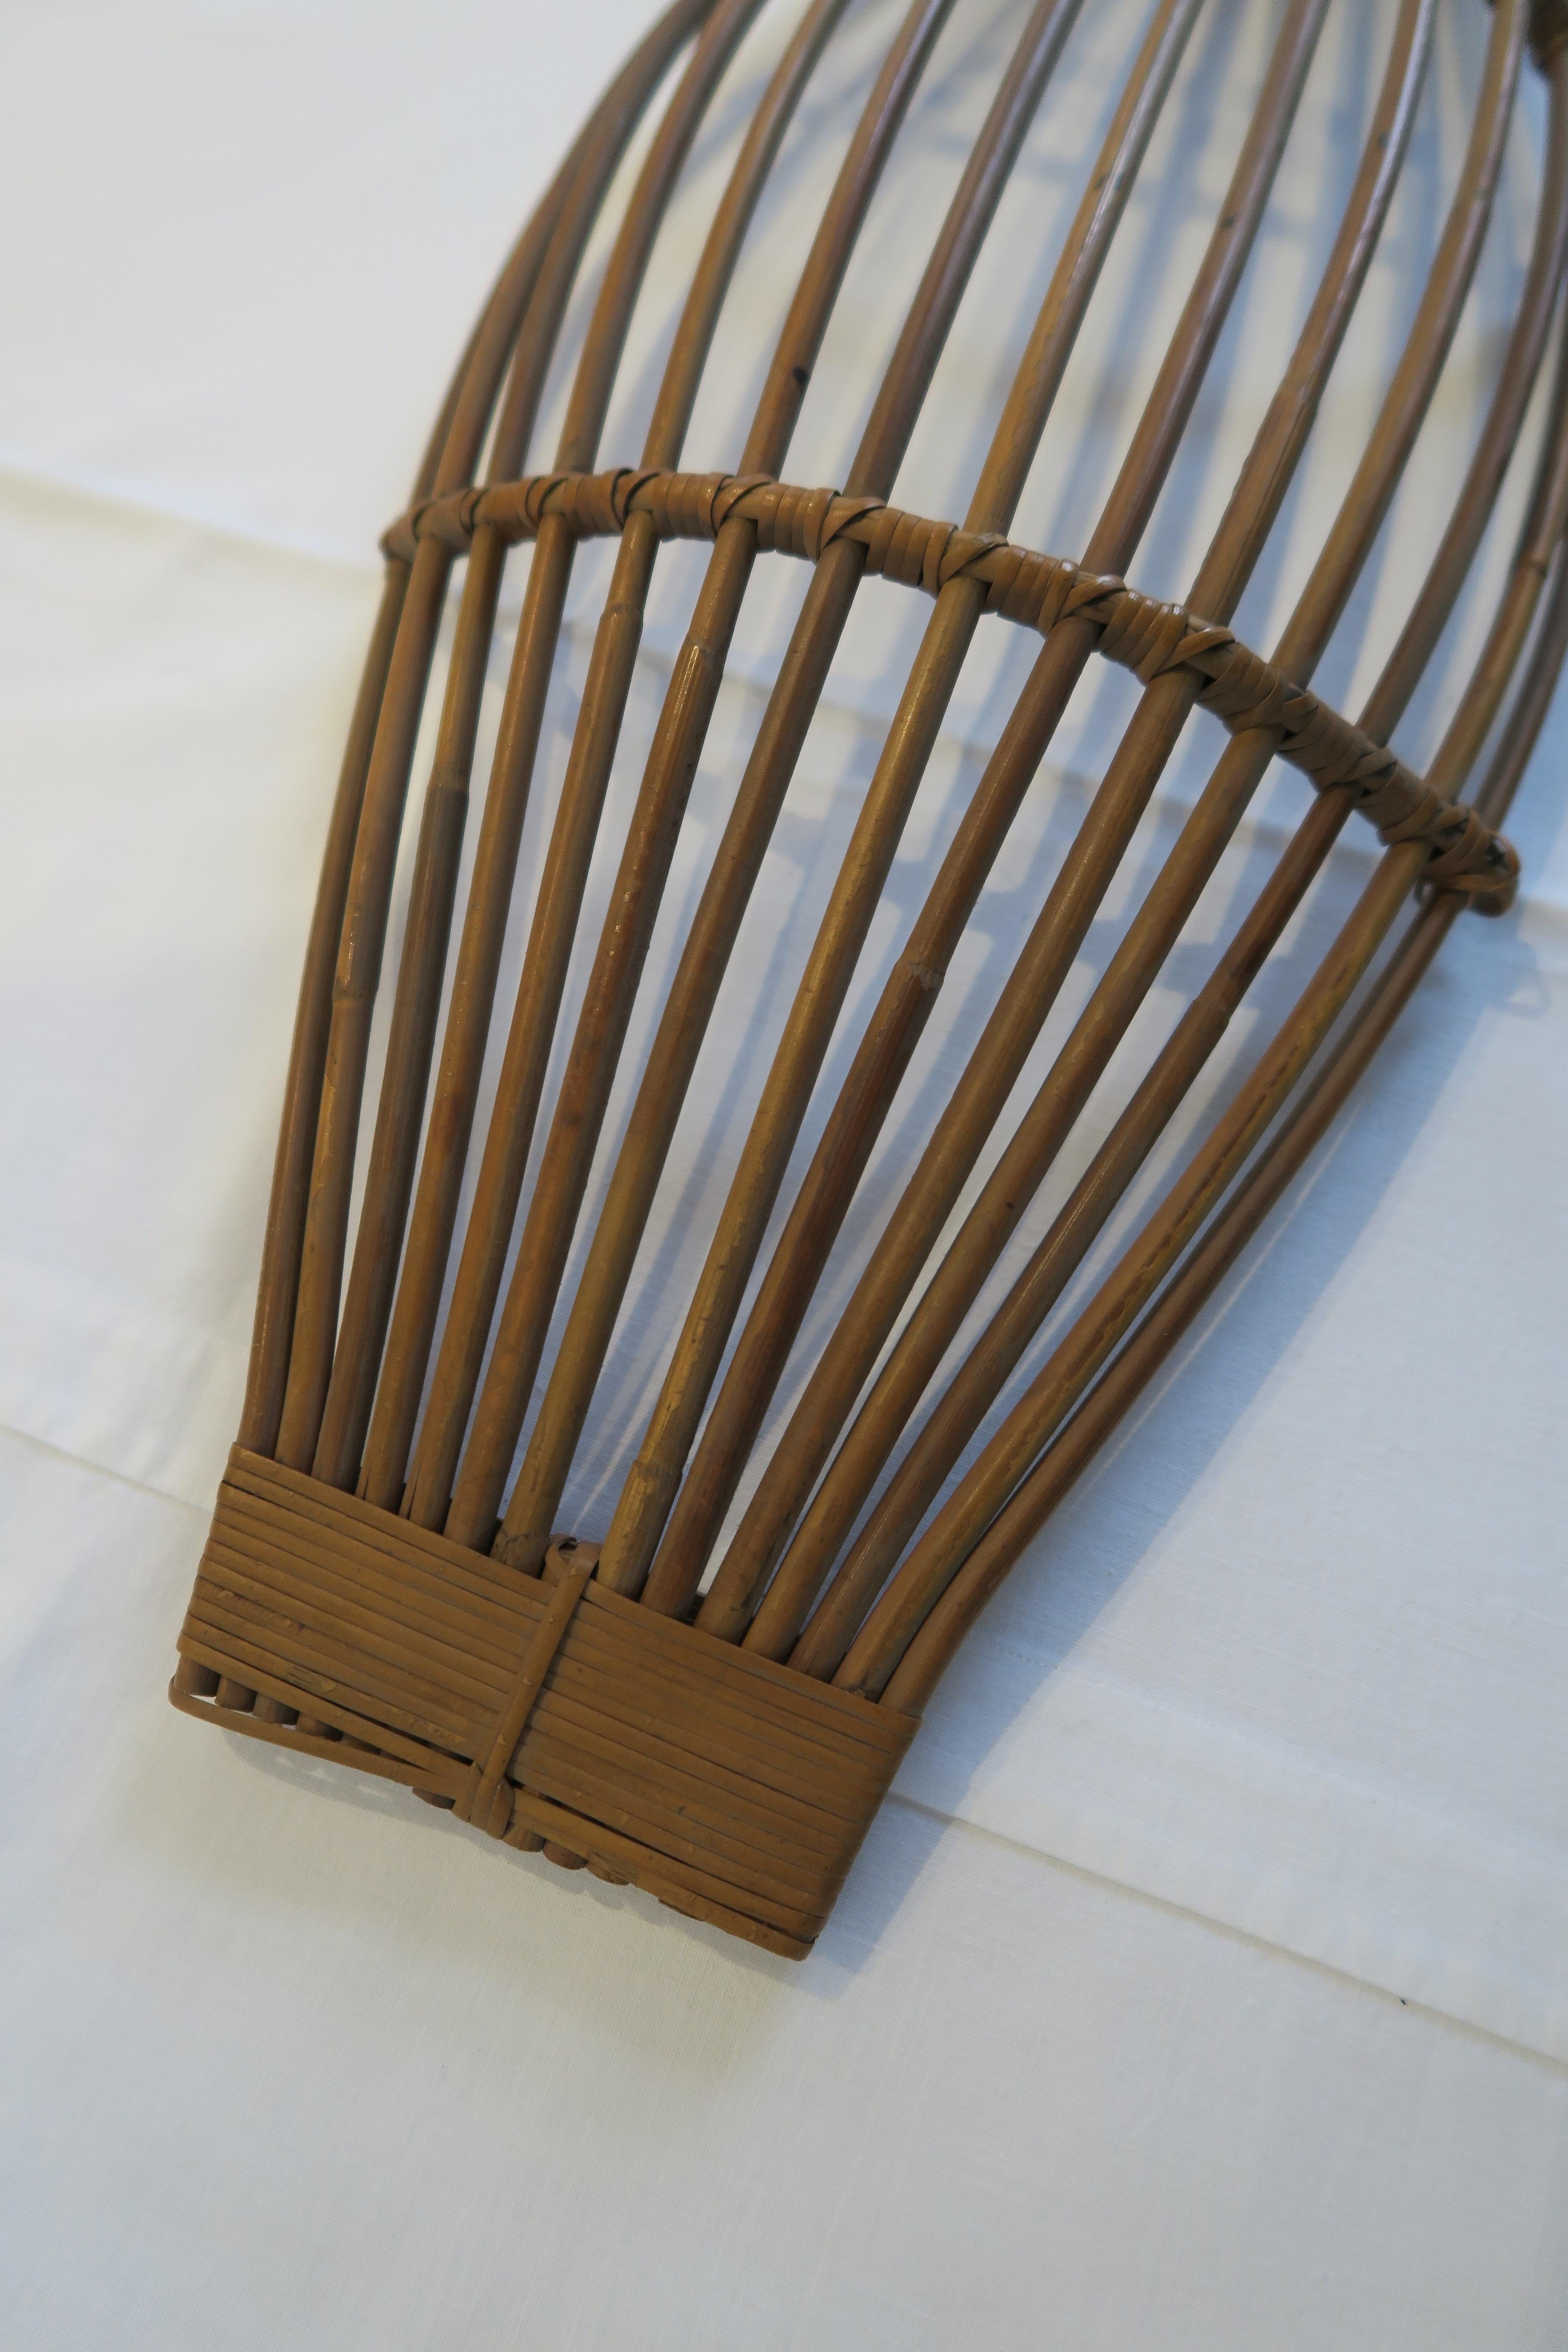 Extra rare Streamlined Fruit Basket Made from Wicker Designed by Carl Auböck 1